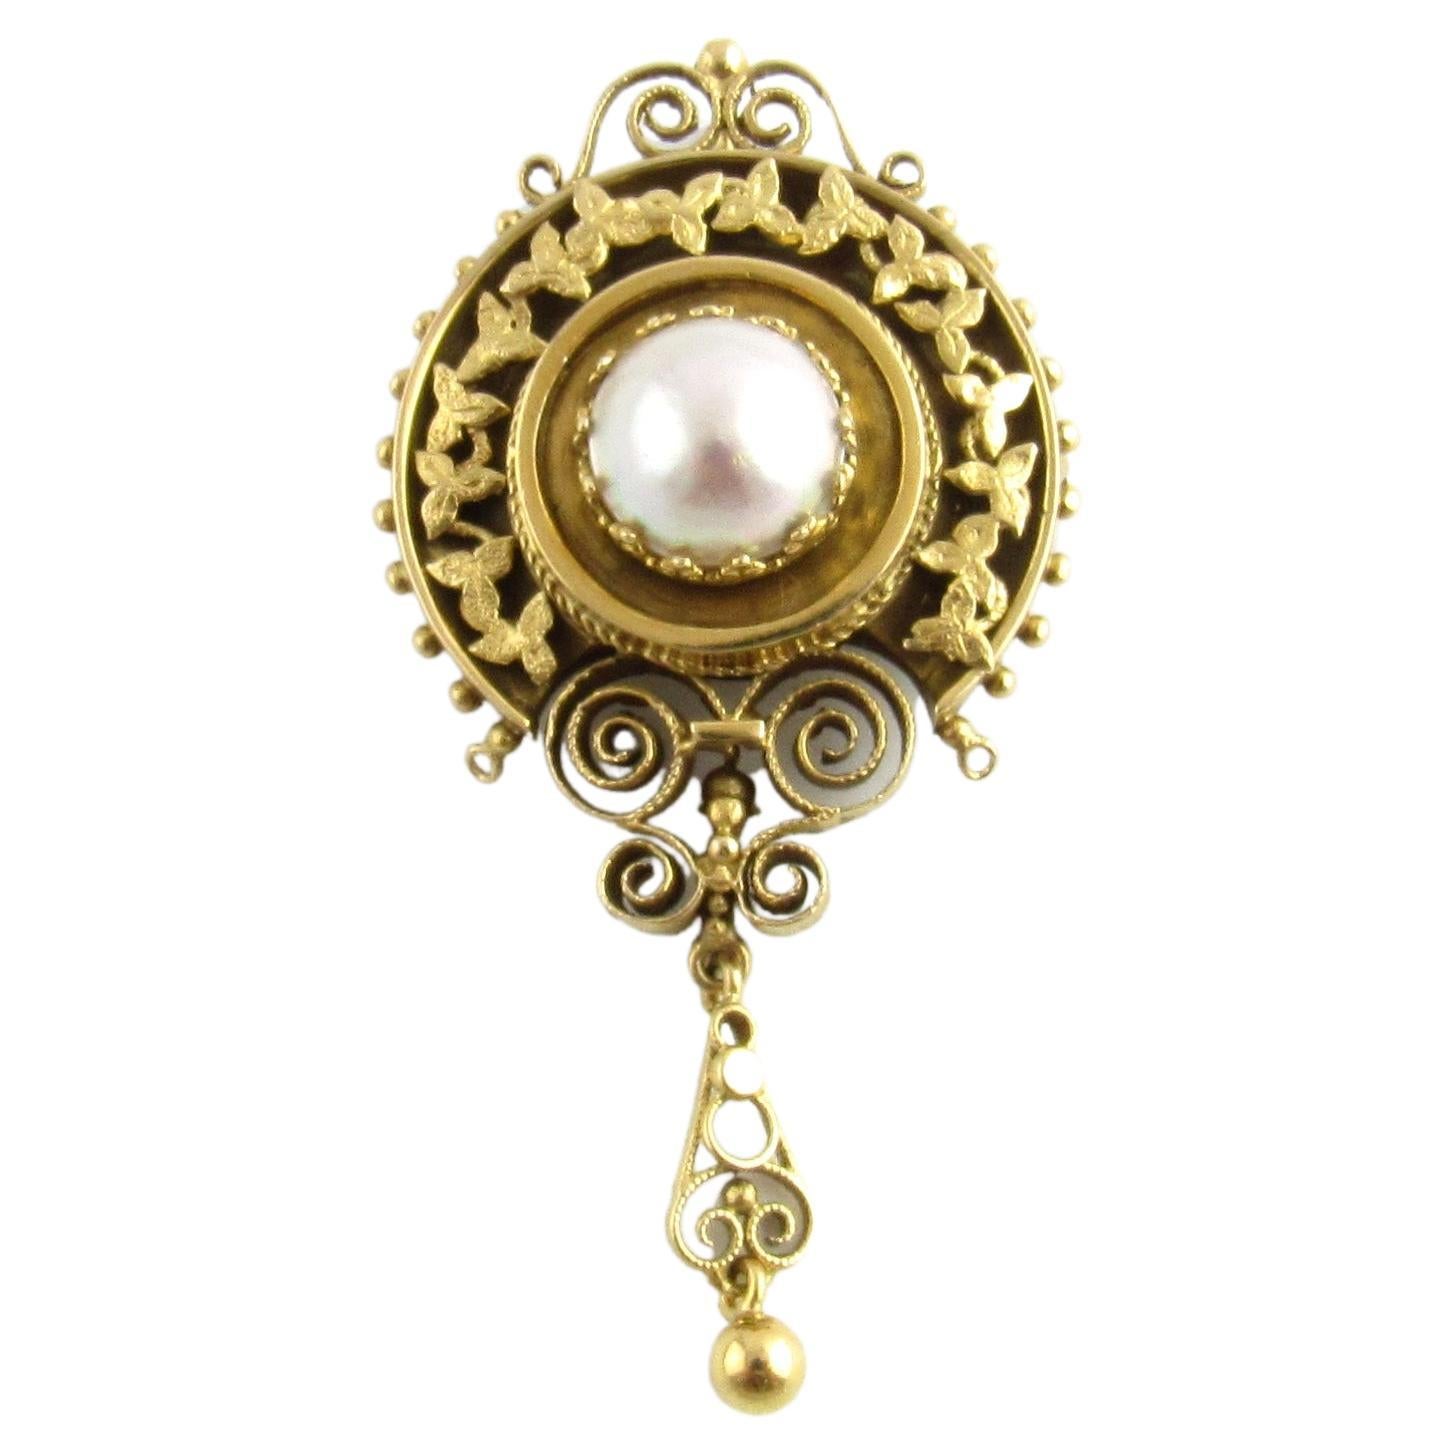 Etruscan Revival 14K Yellow Gold and Mabe Pearl Pin Pendant